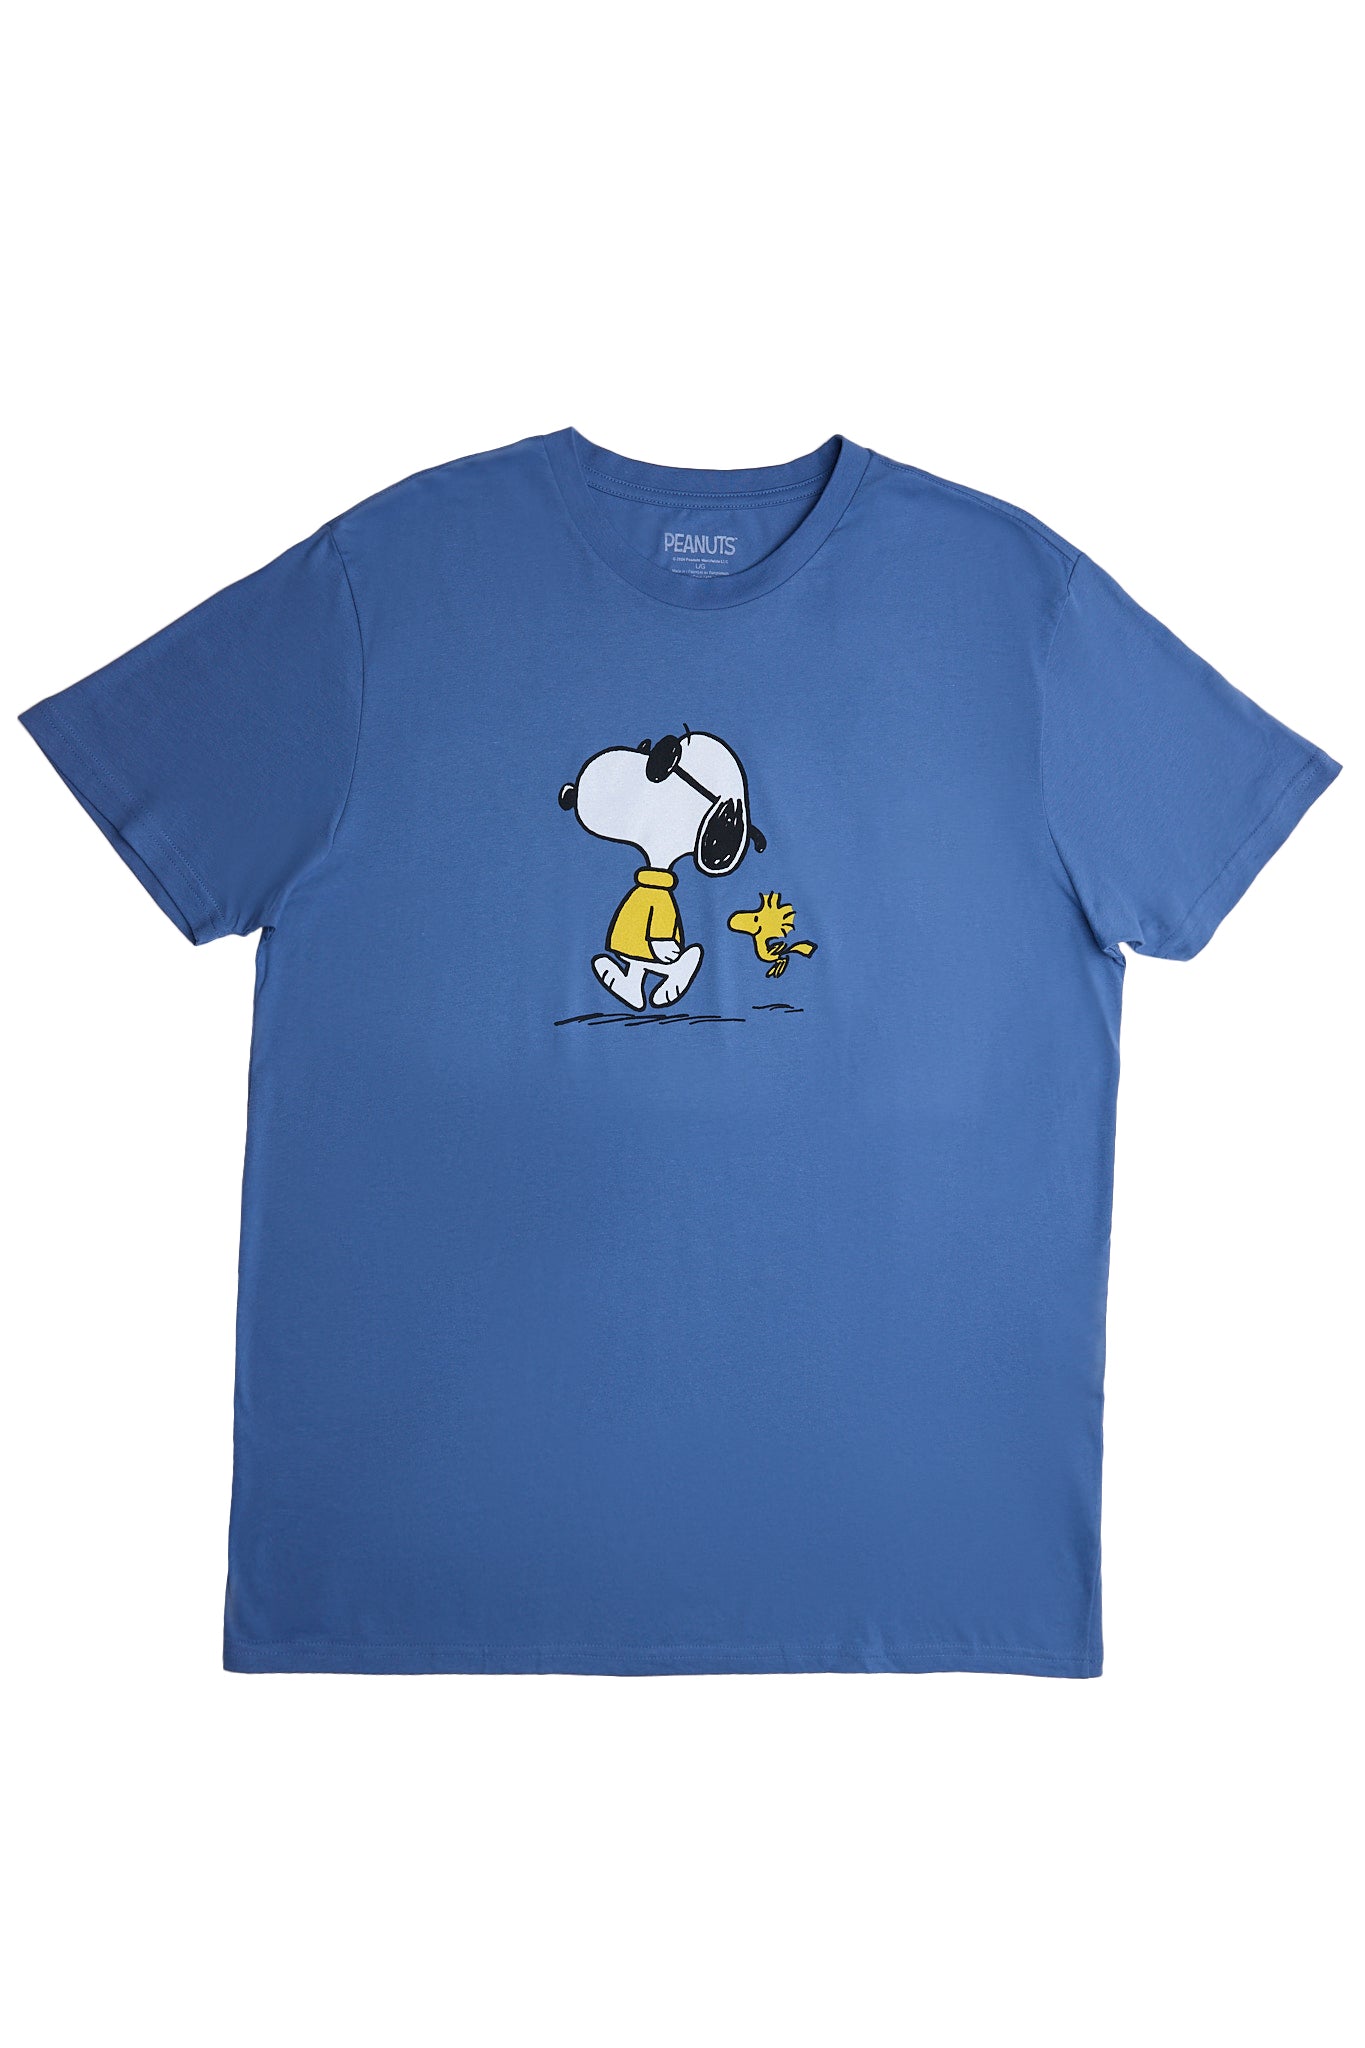 Peanuts Snoopy And Woodstock Graphic Tee